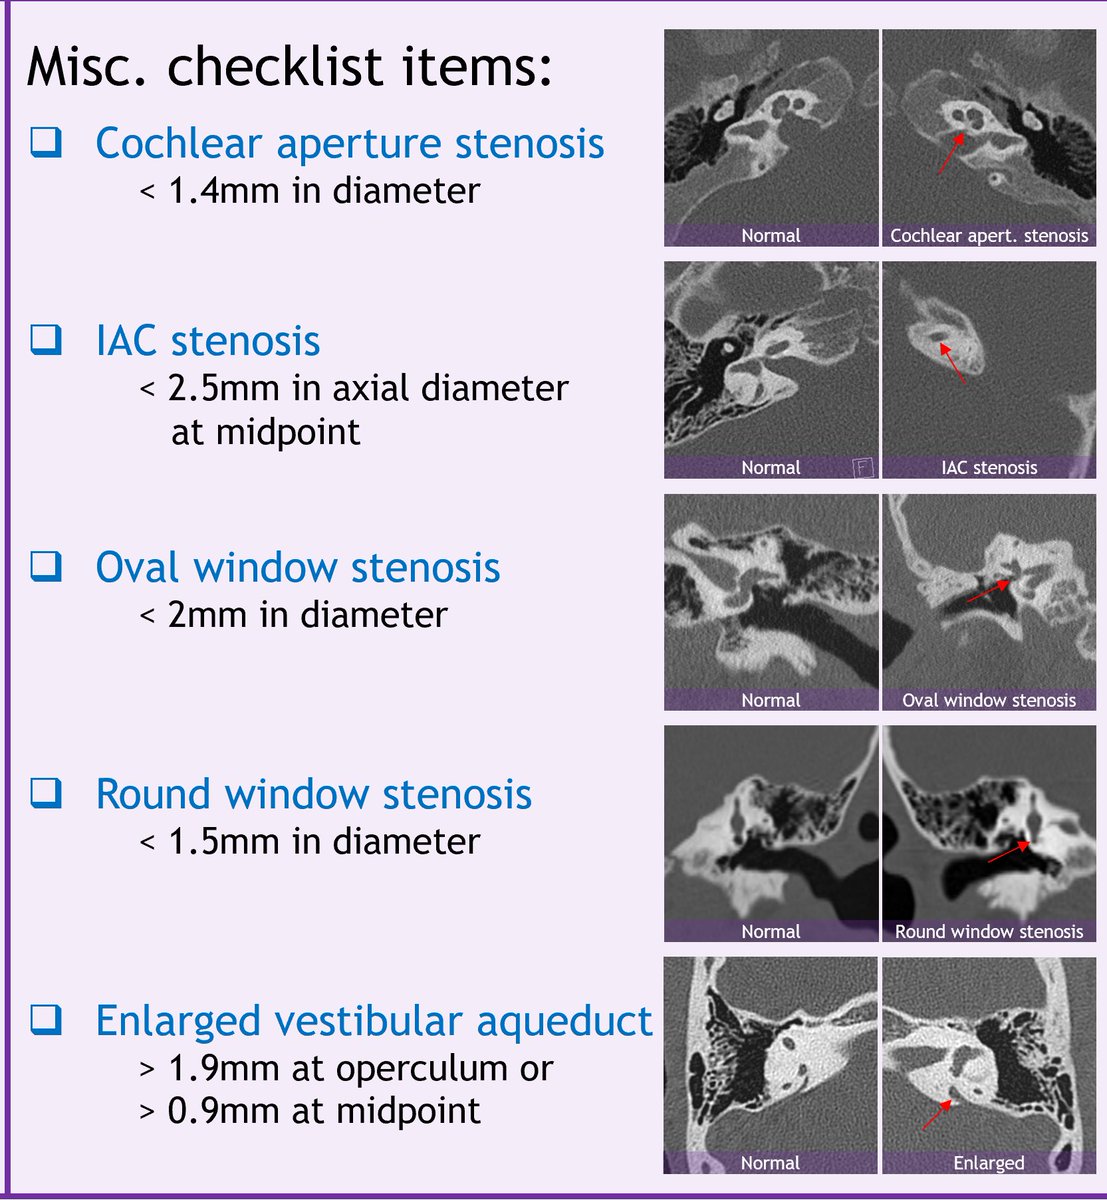 Cochlear abnormalities can be subtle and challenging. Here is an approach to help 👇 Our new congenital hearing loss course includes scrollable cases covering these diagnoses (and others) with discussions, annotated images and pearls: casestacks.com/neuro/fellowsh… #Radiology